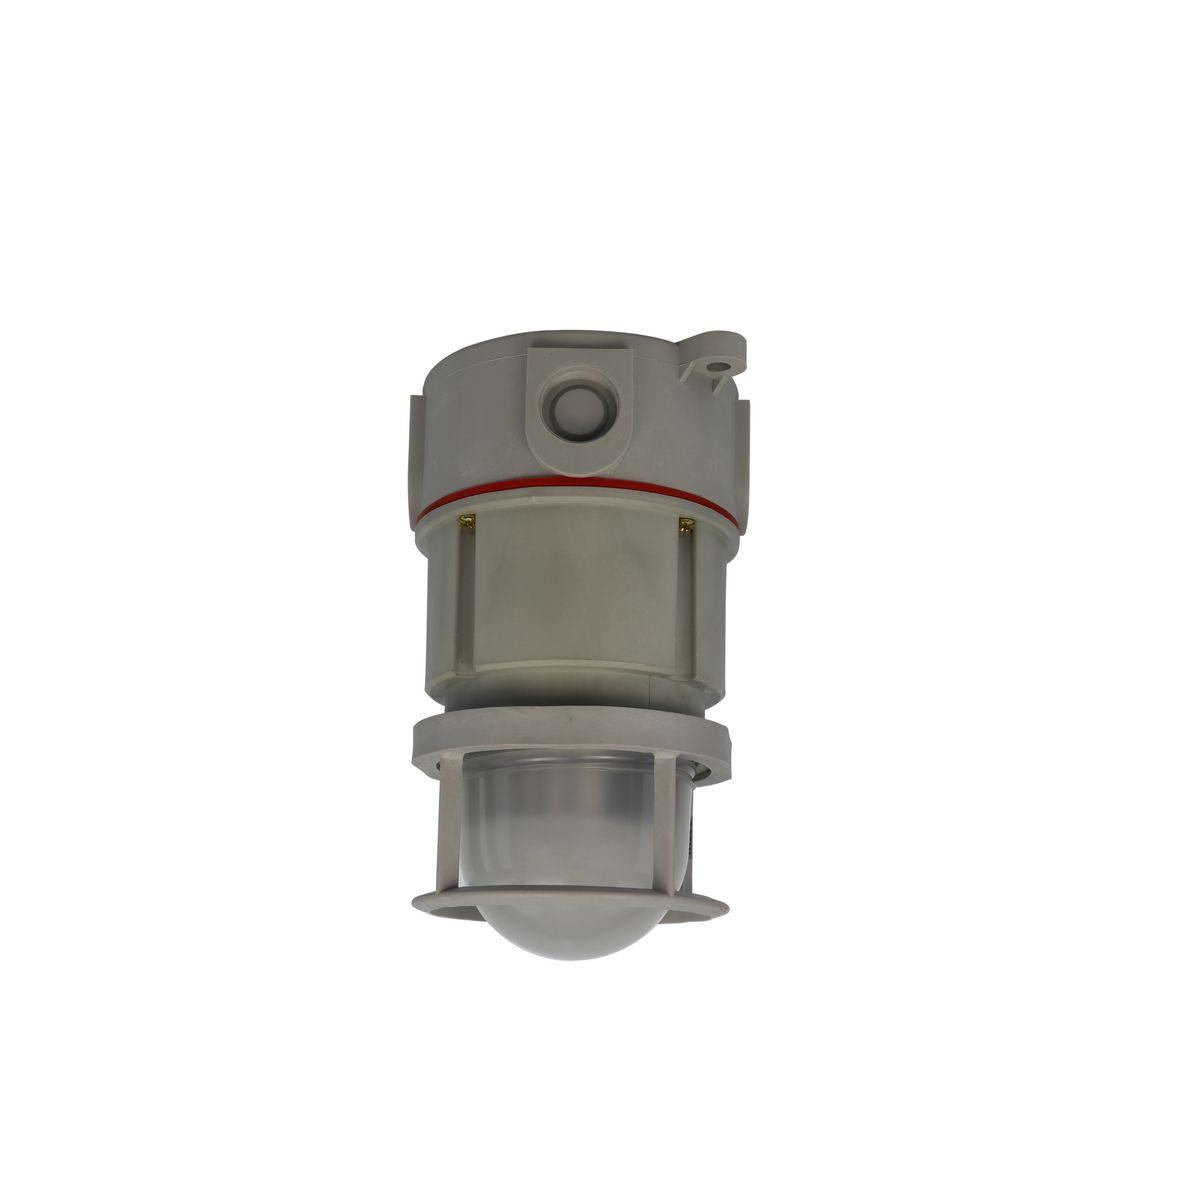 Hubbell NVL230X8G NVL Series Non-Metallic Corrosion Resistant Hazardous Location LED Fixture, M20 Ceiling Mount With Guard  ; Energy and labor-saving LED ; High Efﬁcacy (lumens per watt) ; Compact Size ; Type 3, 4, & 4X Rated ; IP66 Marine Rated ; ABS Approved ; Resists co